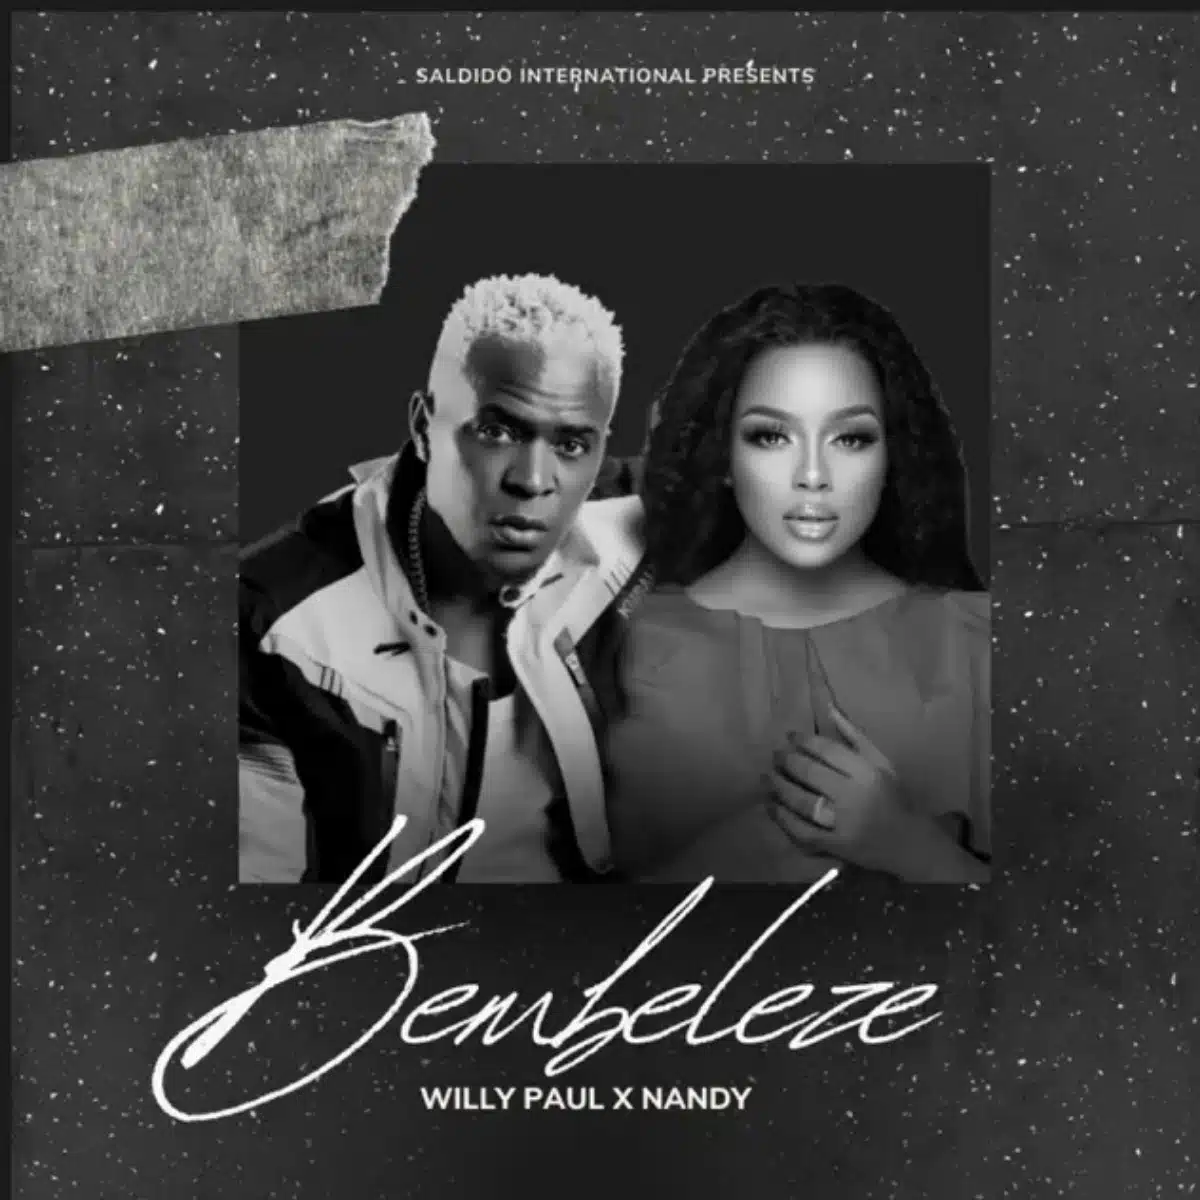 DOWNLOAD: Willy Paul & Nandy – “Bembeleze” (Video & Audio) Mp3